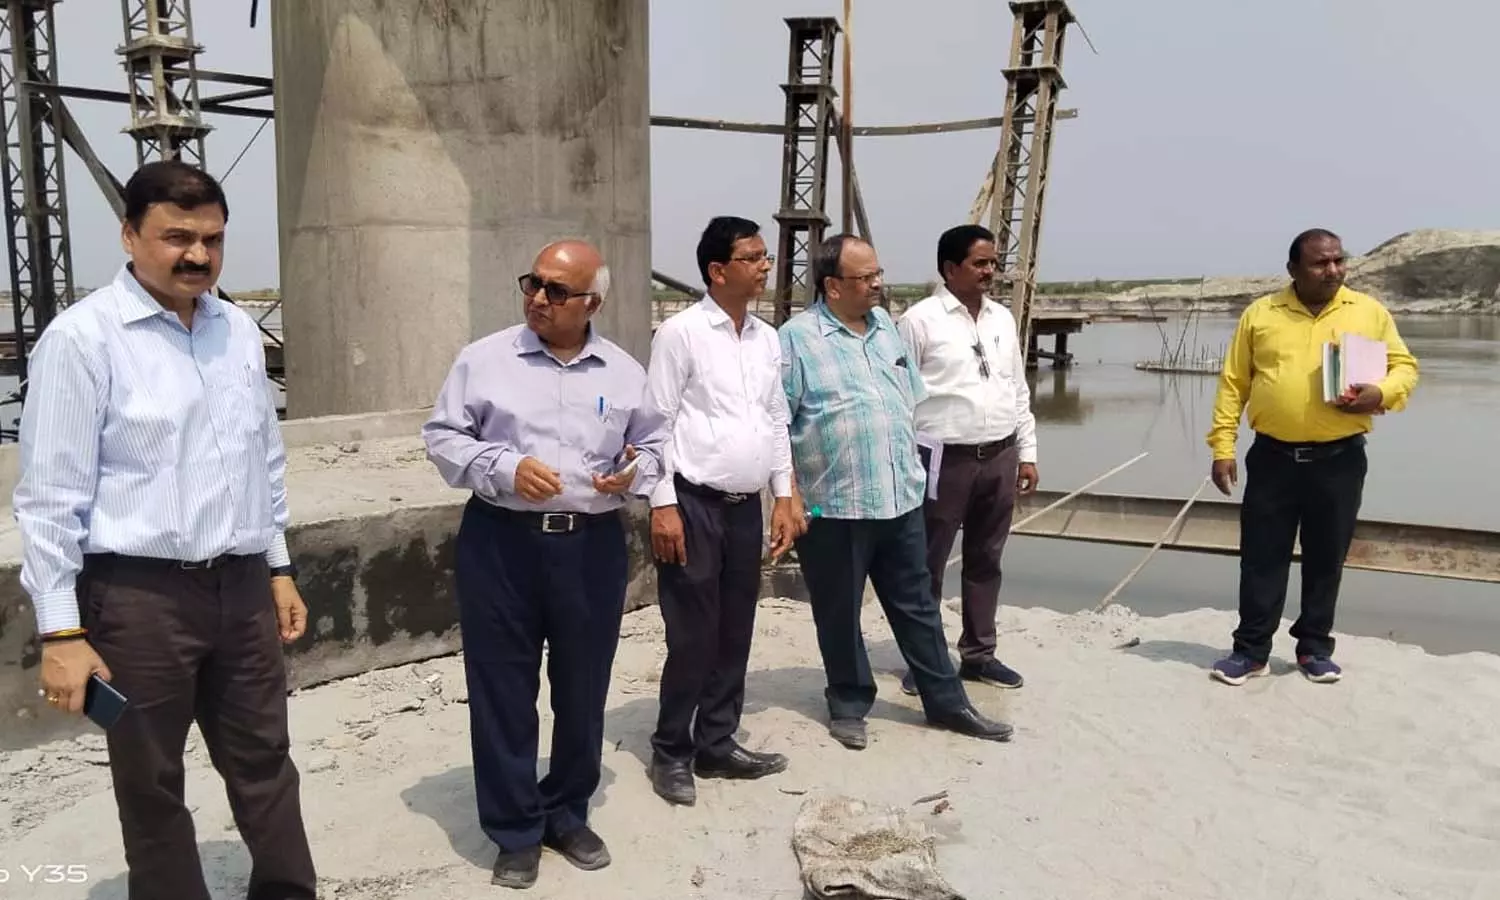 PWD and Setu Nigam started investigation into the case of falling beam of under-construction bridge, reprimanded the project manager